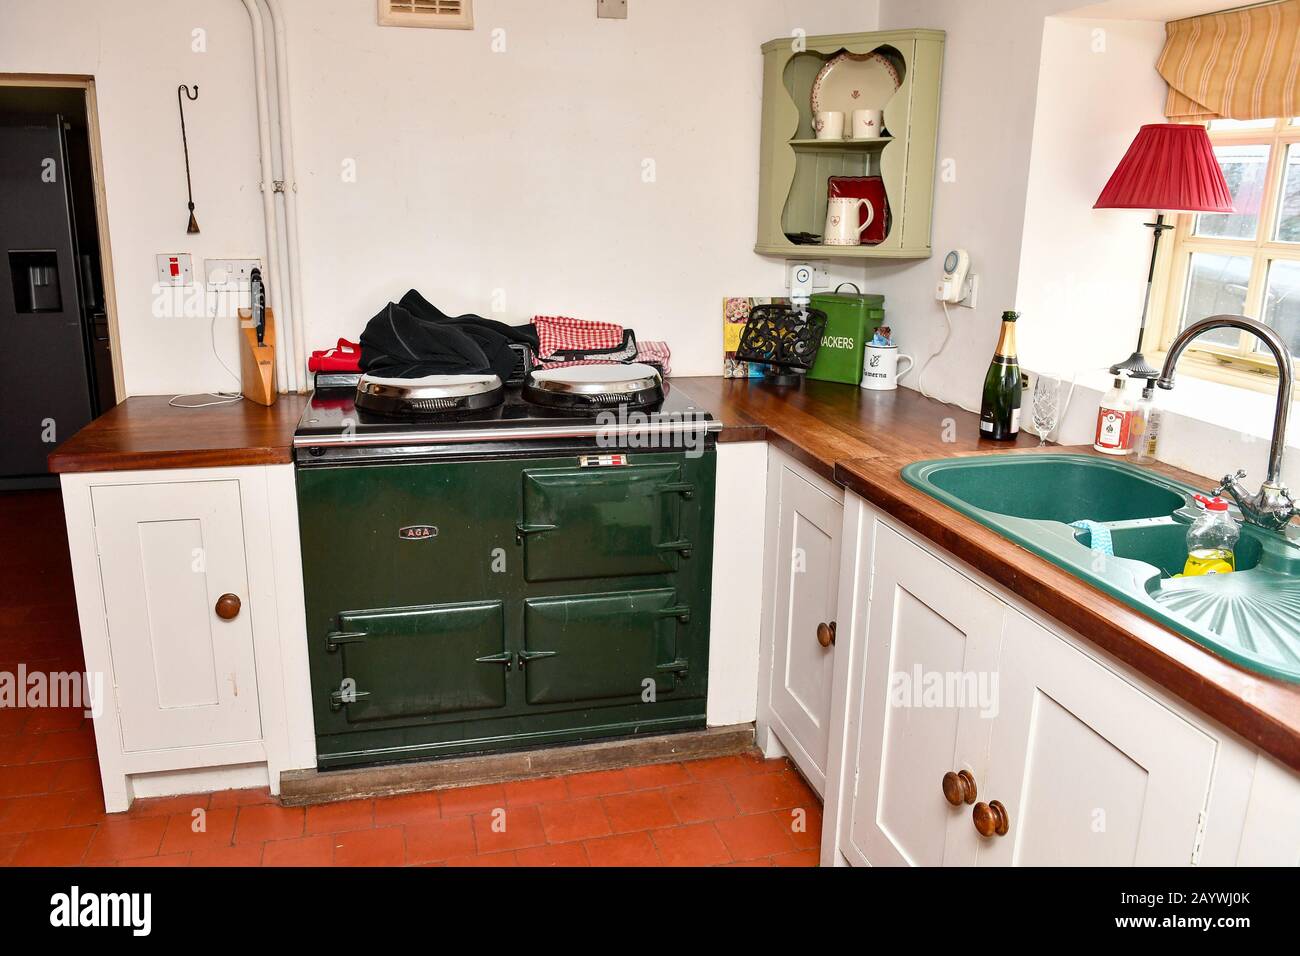 The kitchen in Shrubbery Farm in Longnor near Shrewsbury, a 300-year-old four bedroom farmhouse which 23-year-old Jemma Nicklin has won after buying two £2 tickets in a raffle organised by owner Mike Chatha. Stock Photo